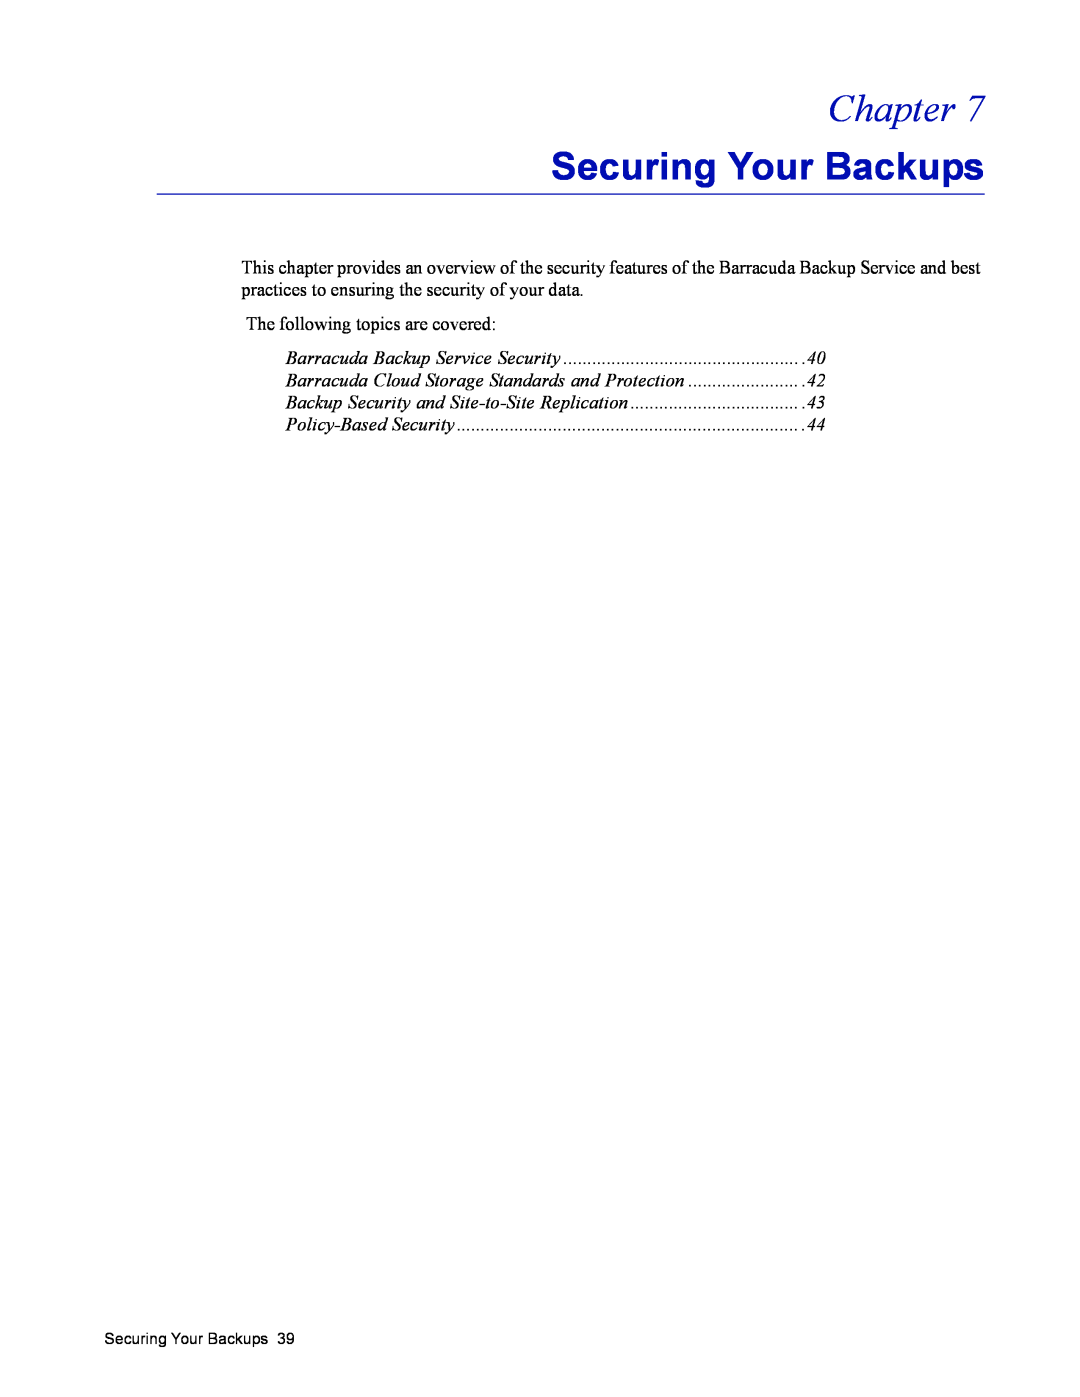 Barracuda Networks 4 manual Securing Your Backups, The following topics are covered, Chapter 